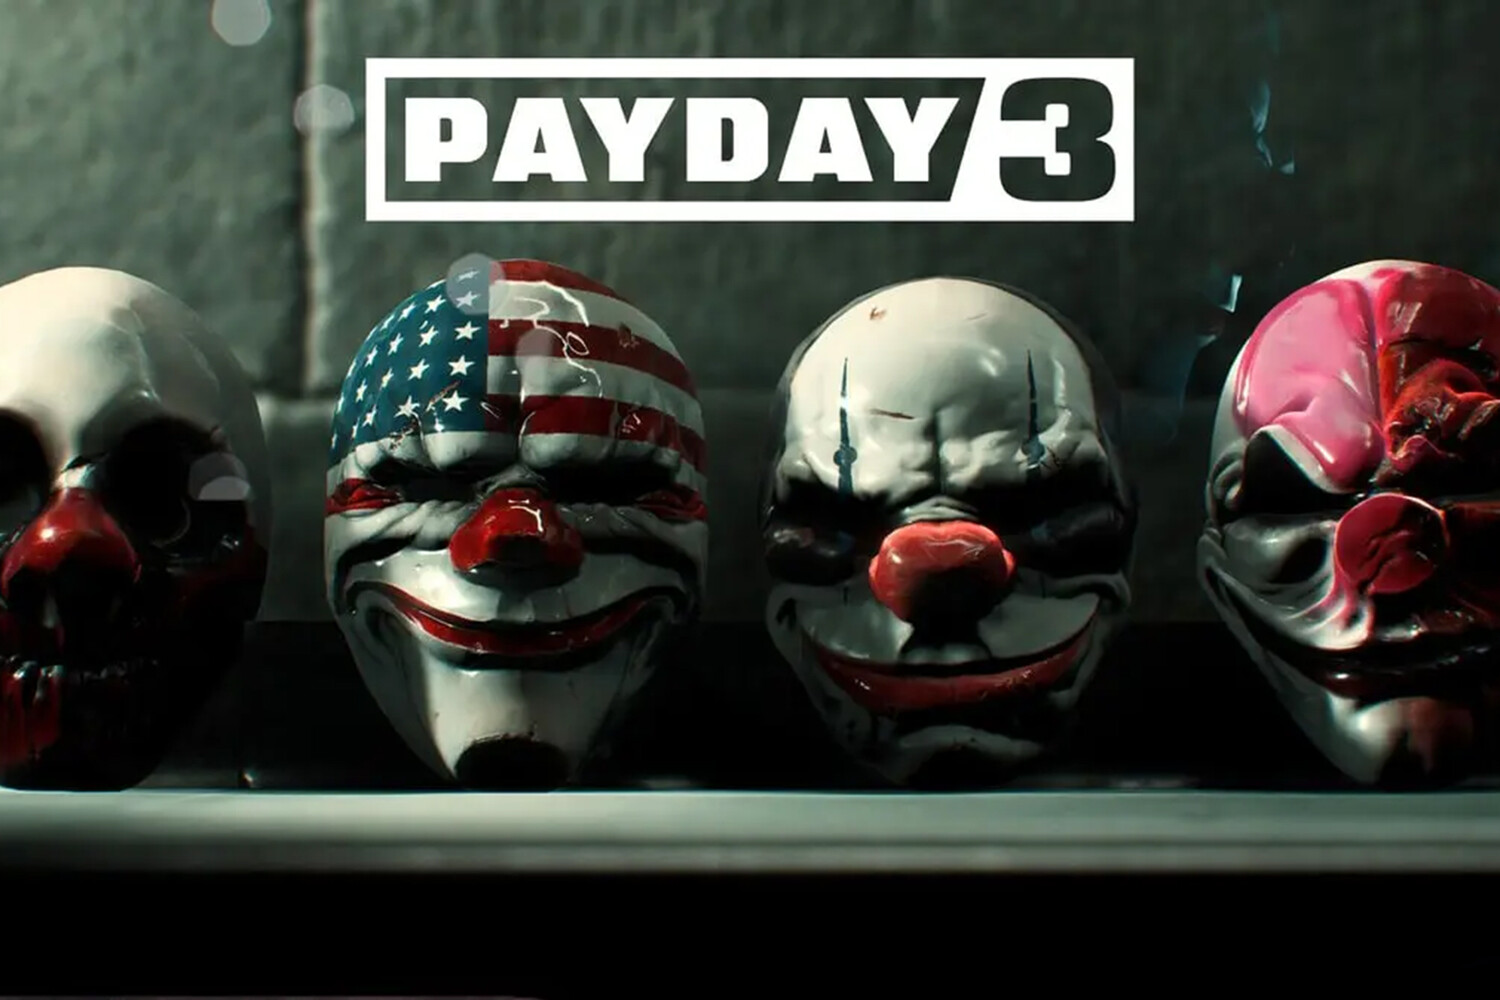 Steam error steam must be running to play this game payday 2 что делать фото 50